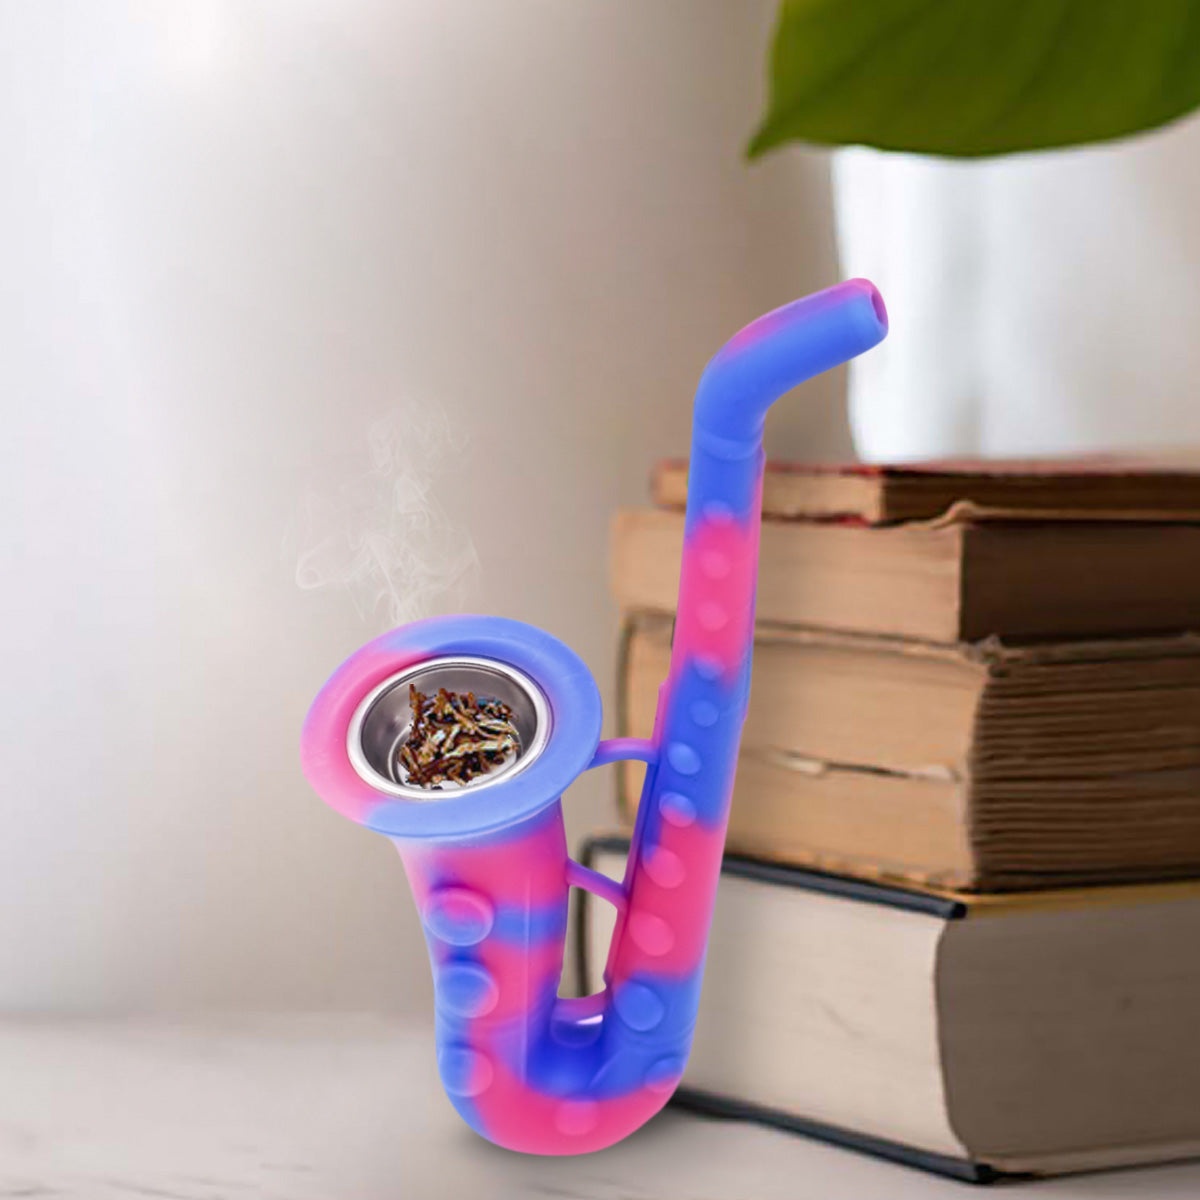 Kookee Silicone Unbreakable Saxophone Smoking Pipe, Tobacco Pipes with Steel Bowl, Blue and Pink